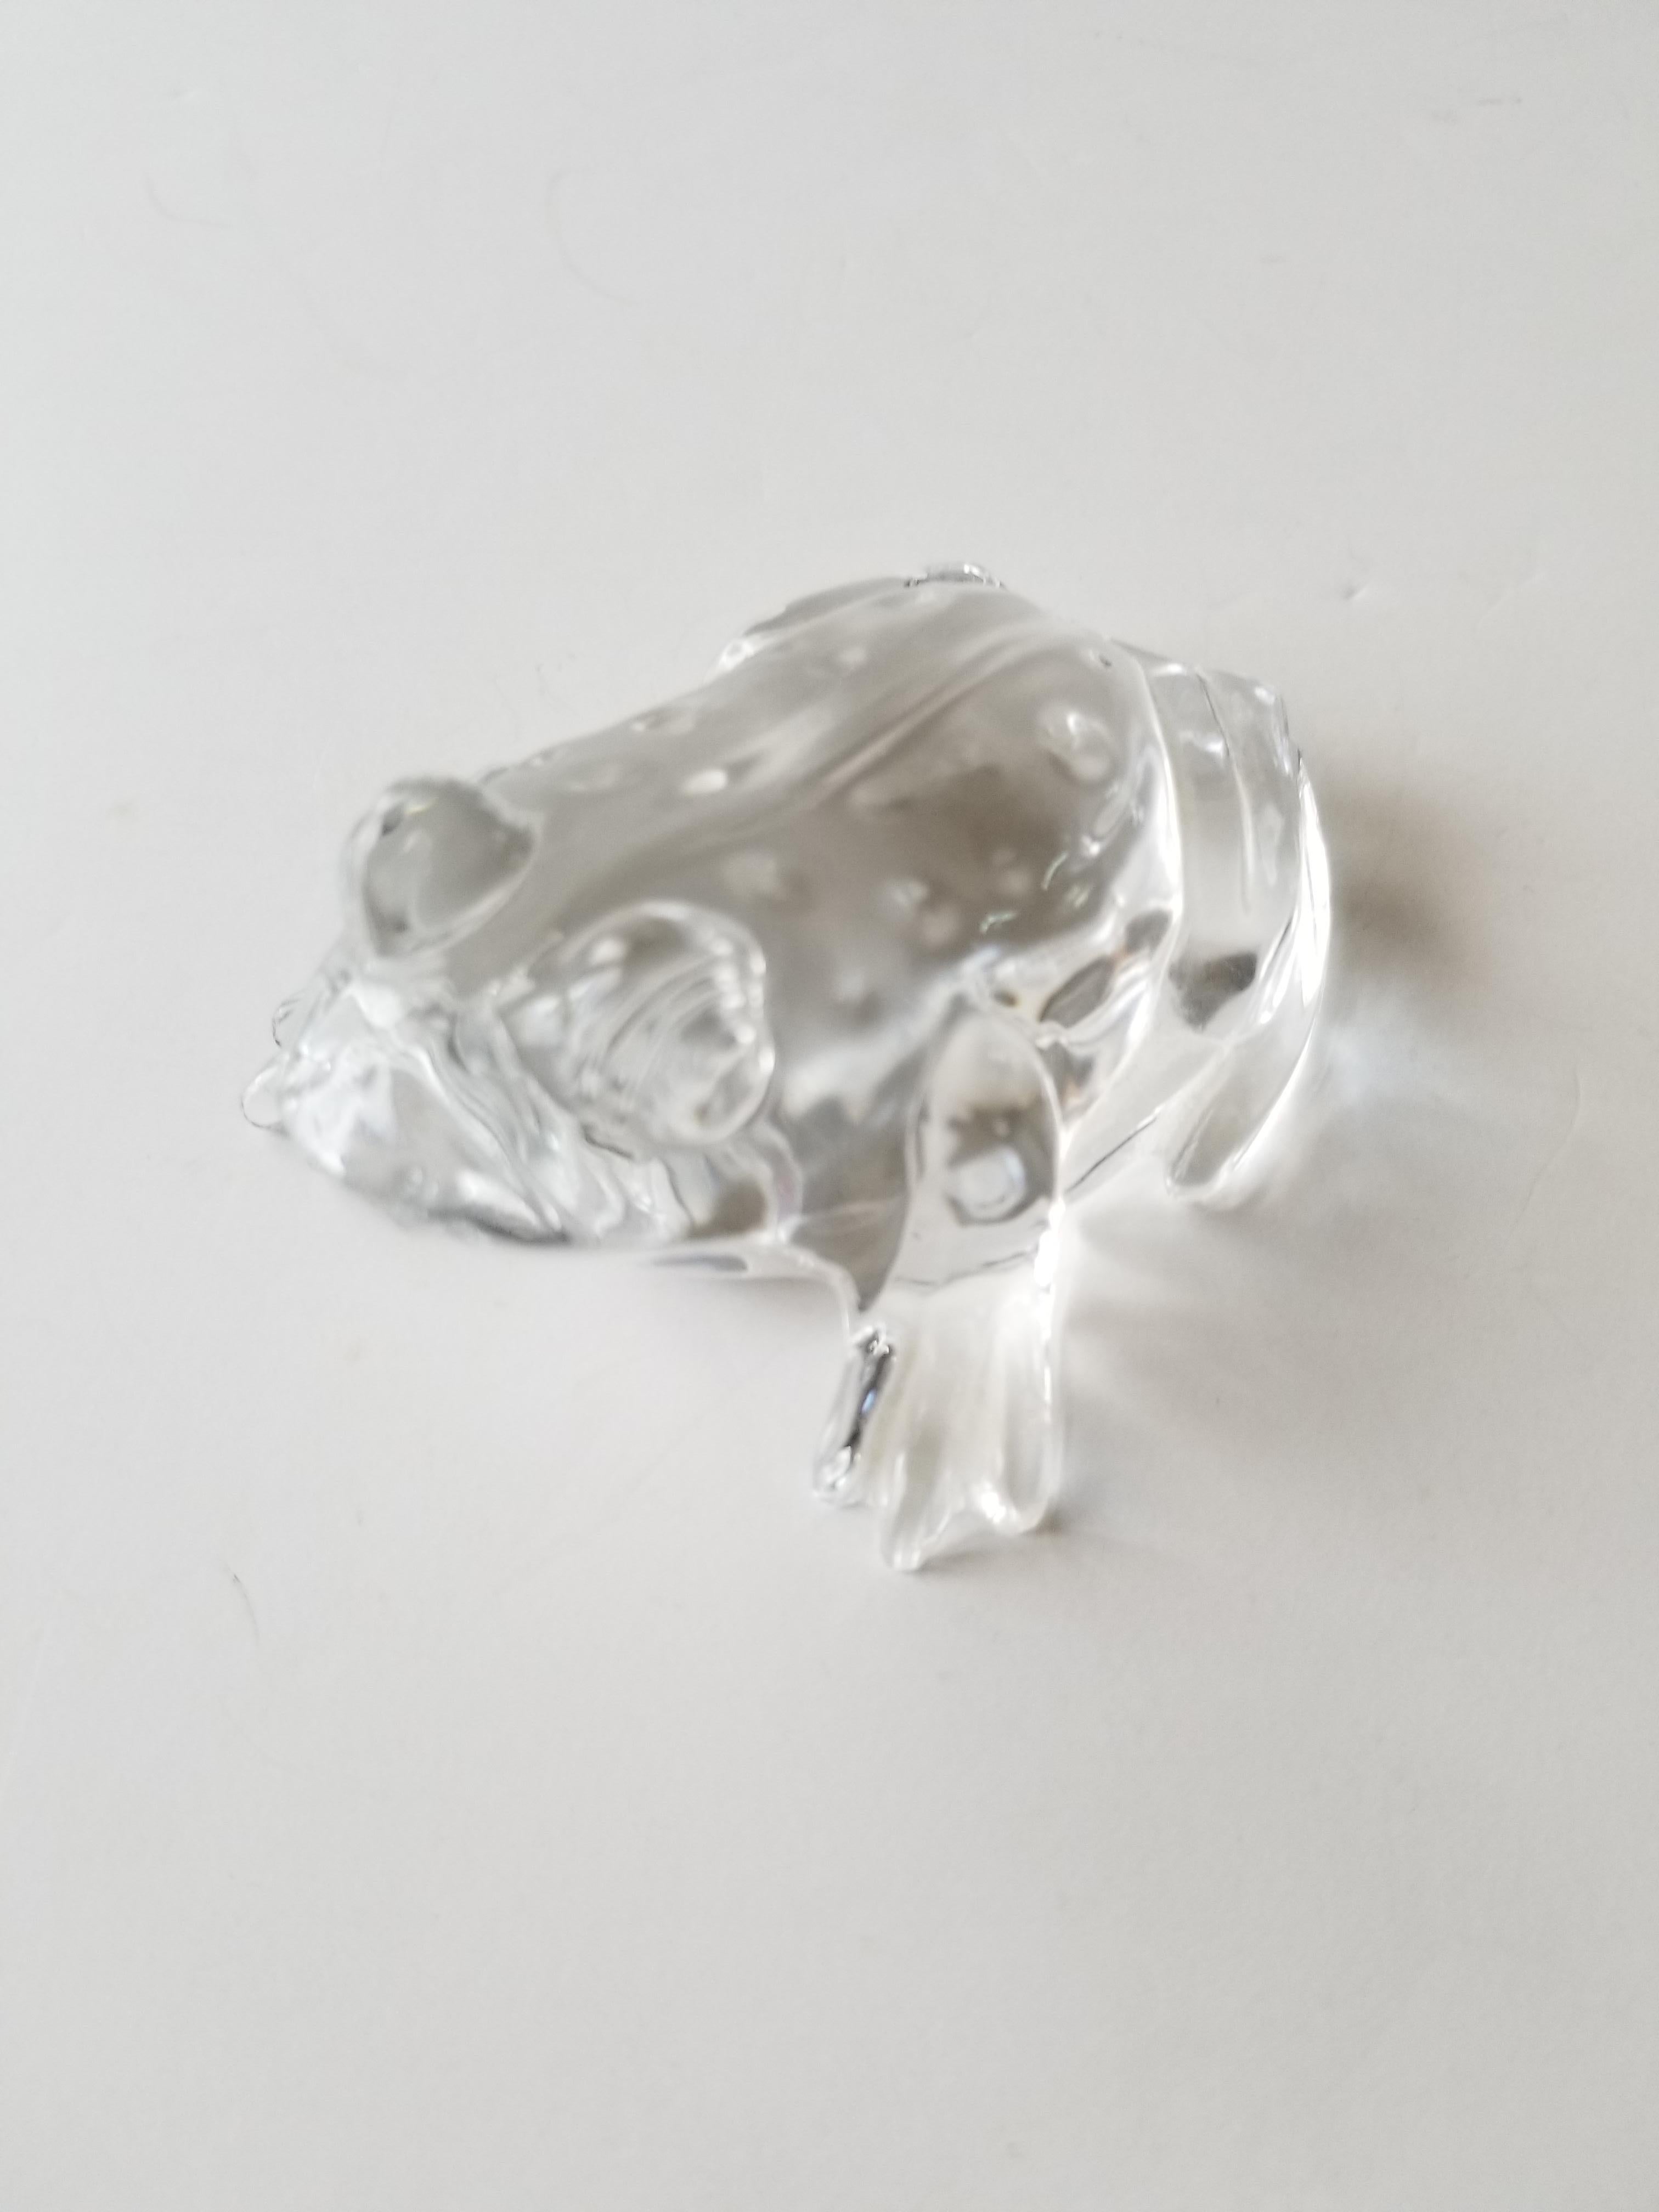 Modern 1980s Lovely Frog Paperweight Sculptural Glass Figurine by Waterford Crystal